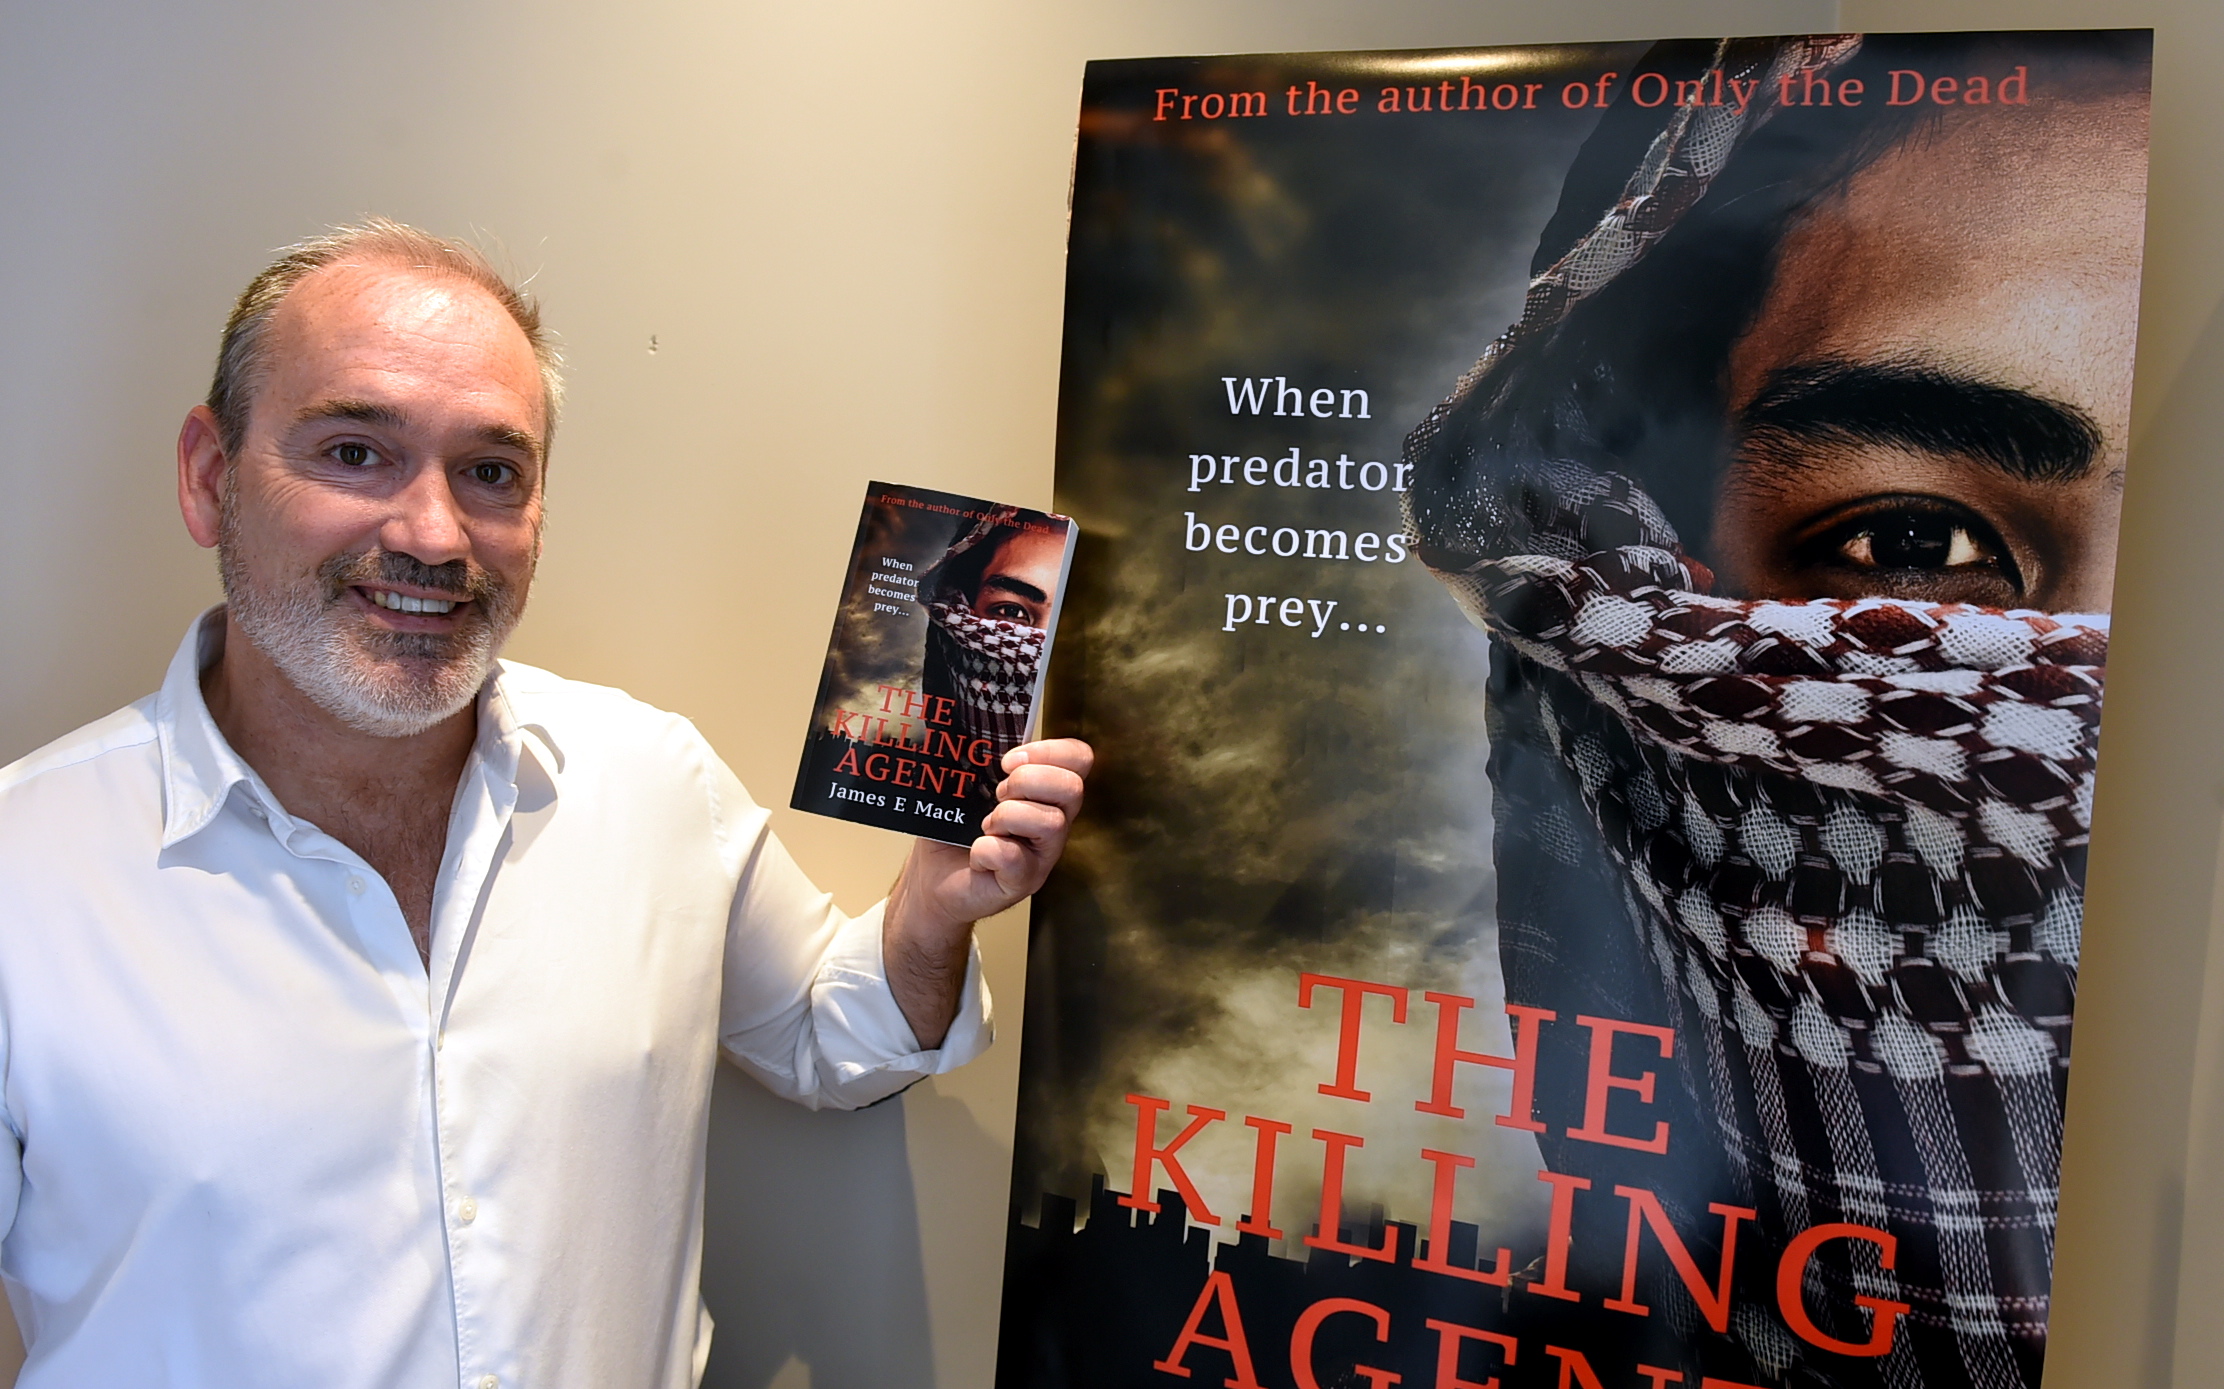 Author James Mackenzie from St Cyrus is launching his third novel, "The Killing Agent".